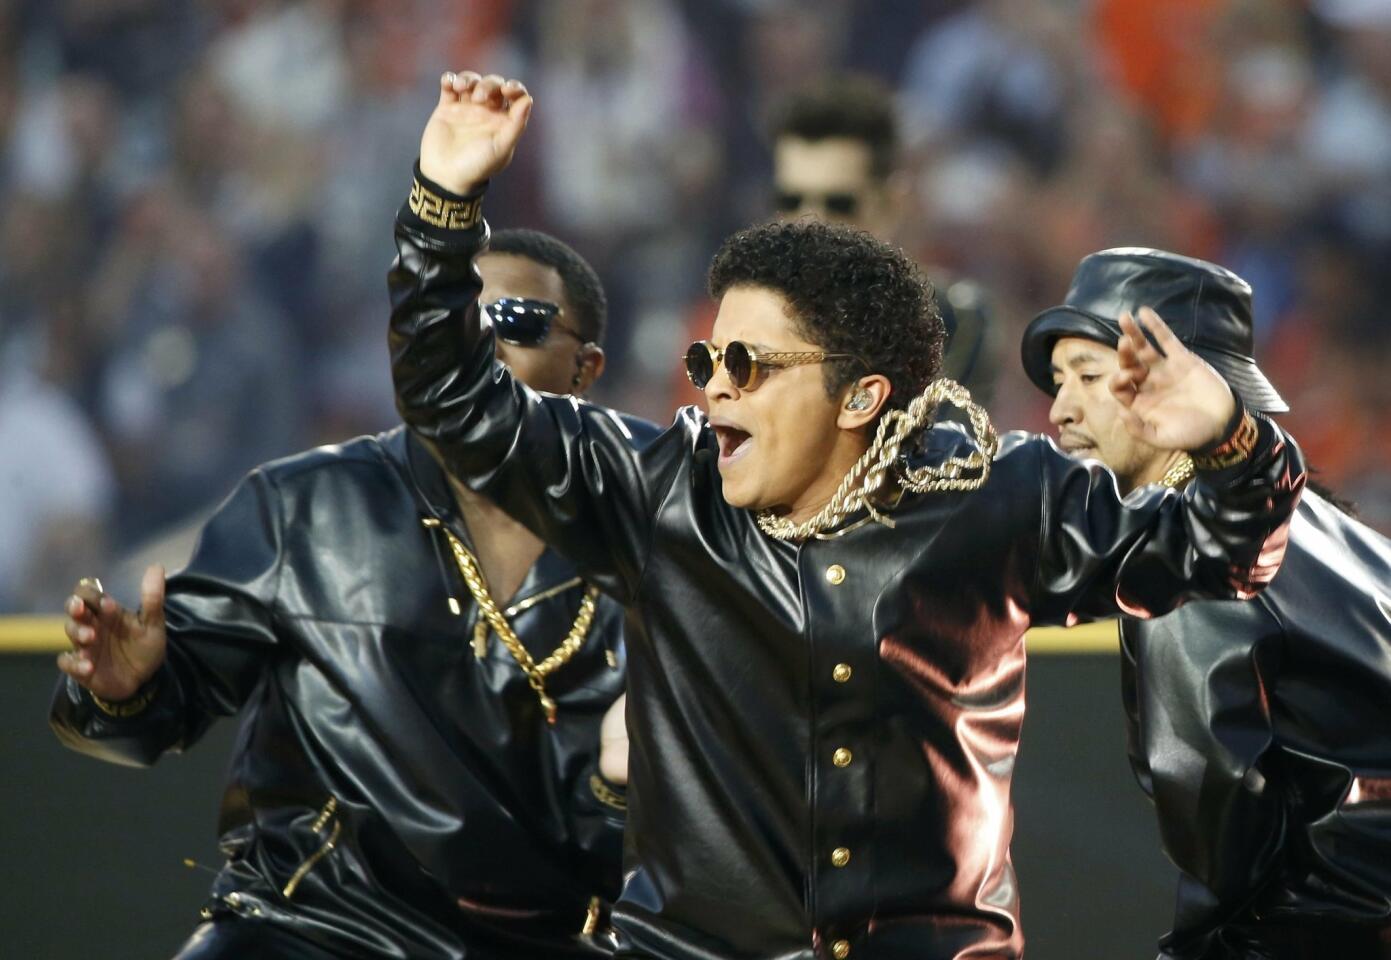 Bruno Mars performs during half-time at the NFL's Super Bowl 50 football game between the Carolina Panthers and the Denver Broncos in Santa Clara. REUTERS/Stephen Lam